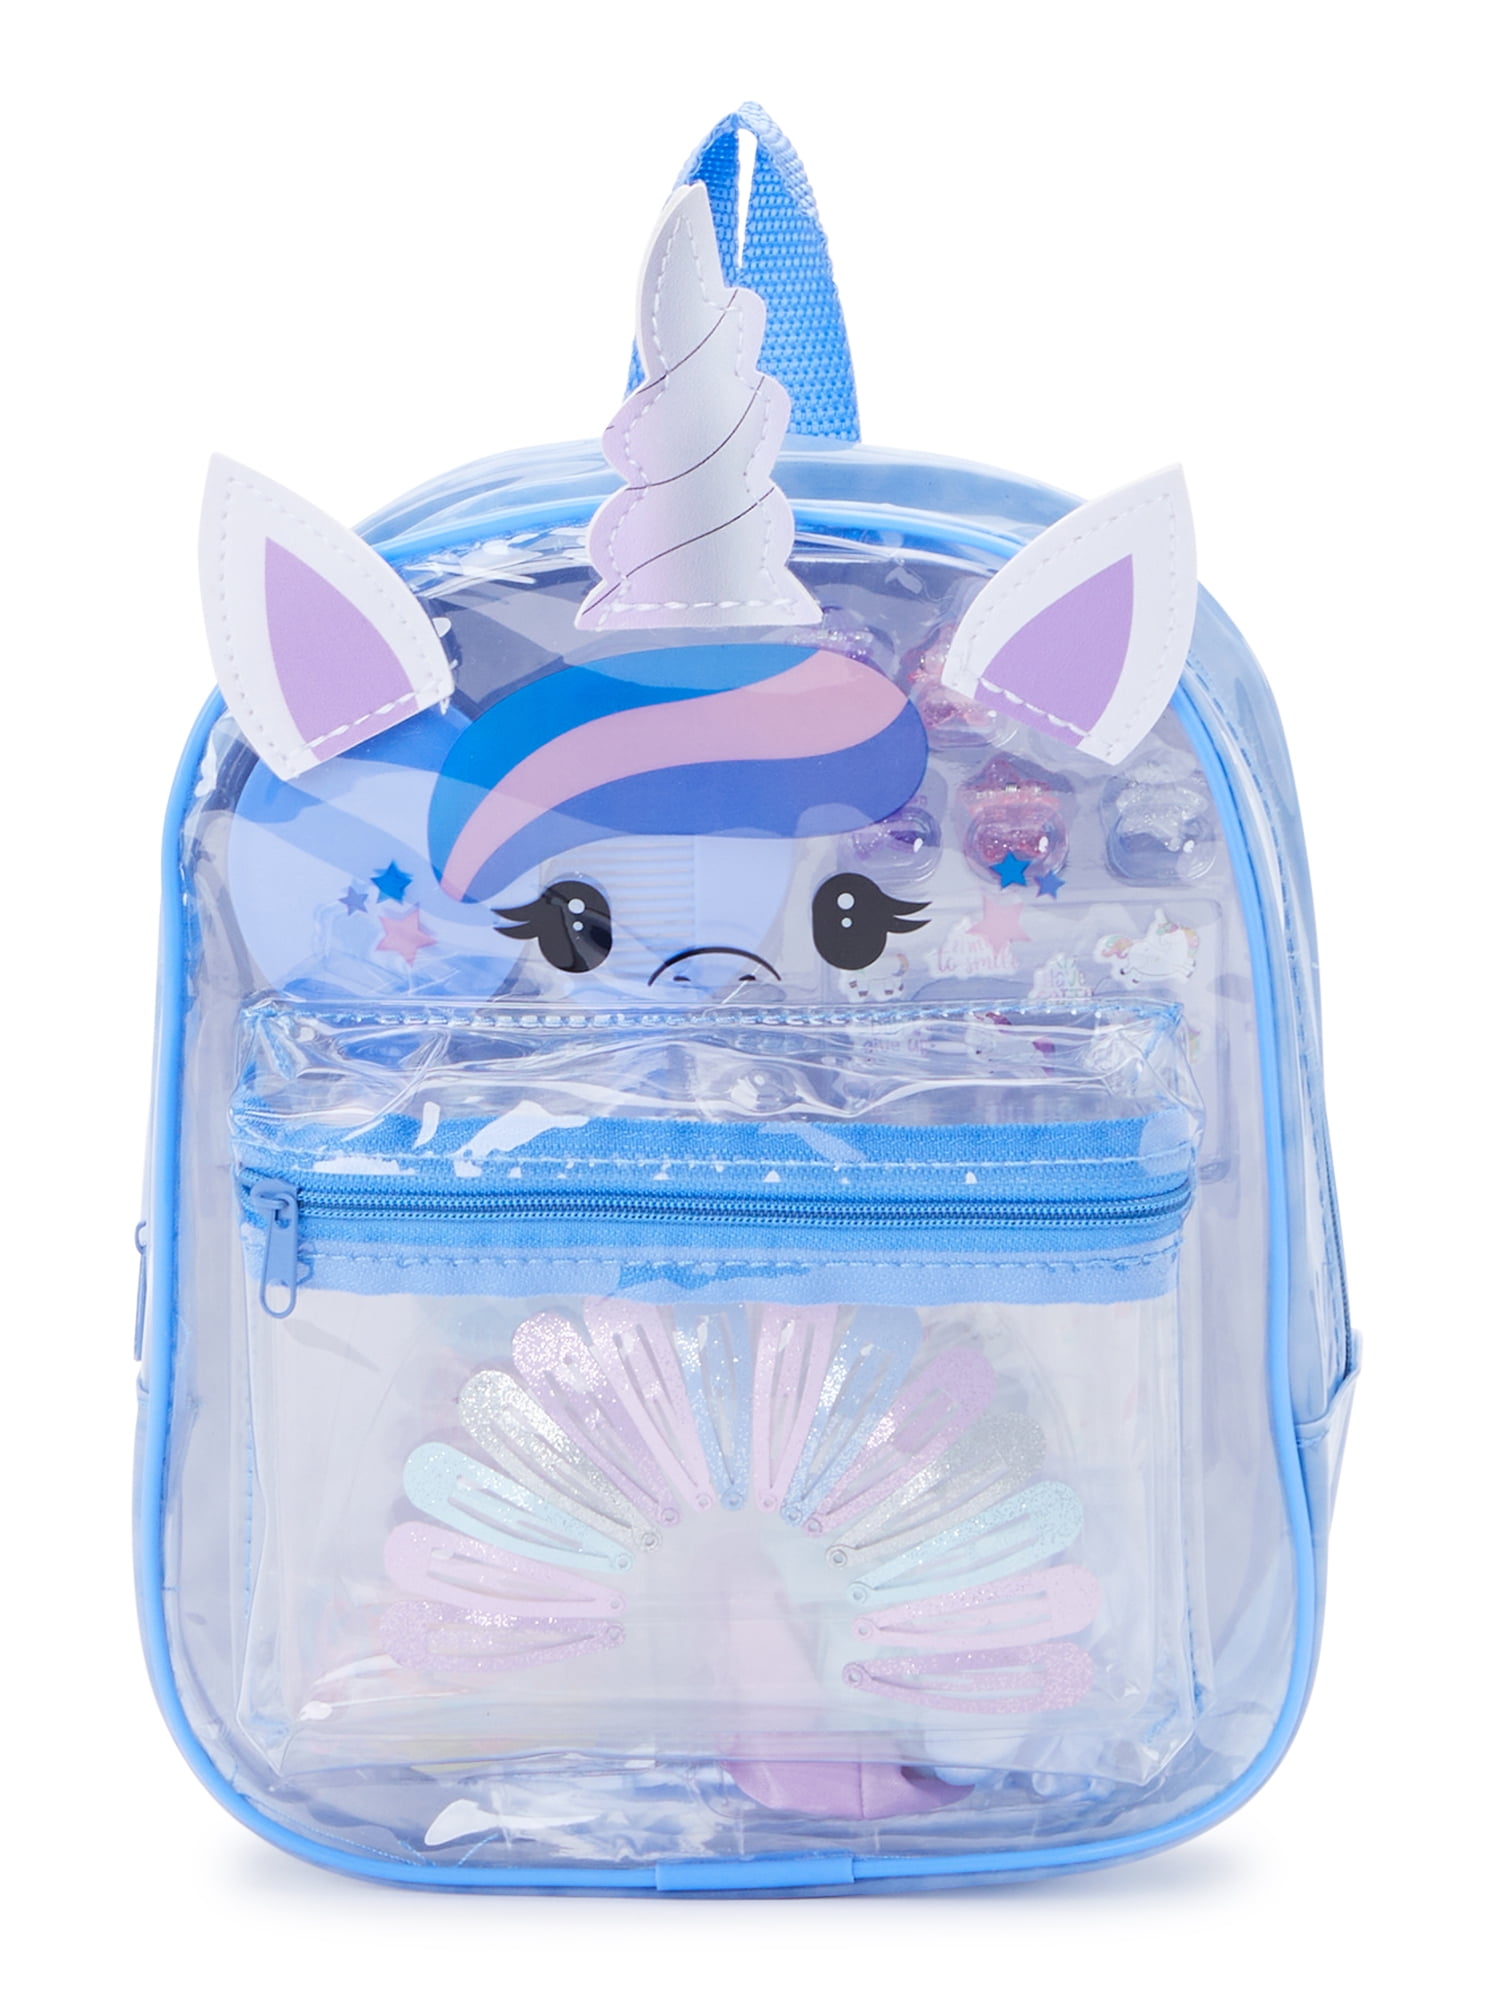 Wonder Nation Children's Unicorn Clear Backpack and Accessories Set, Blue,100-Piece